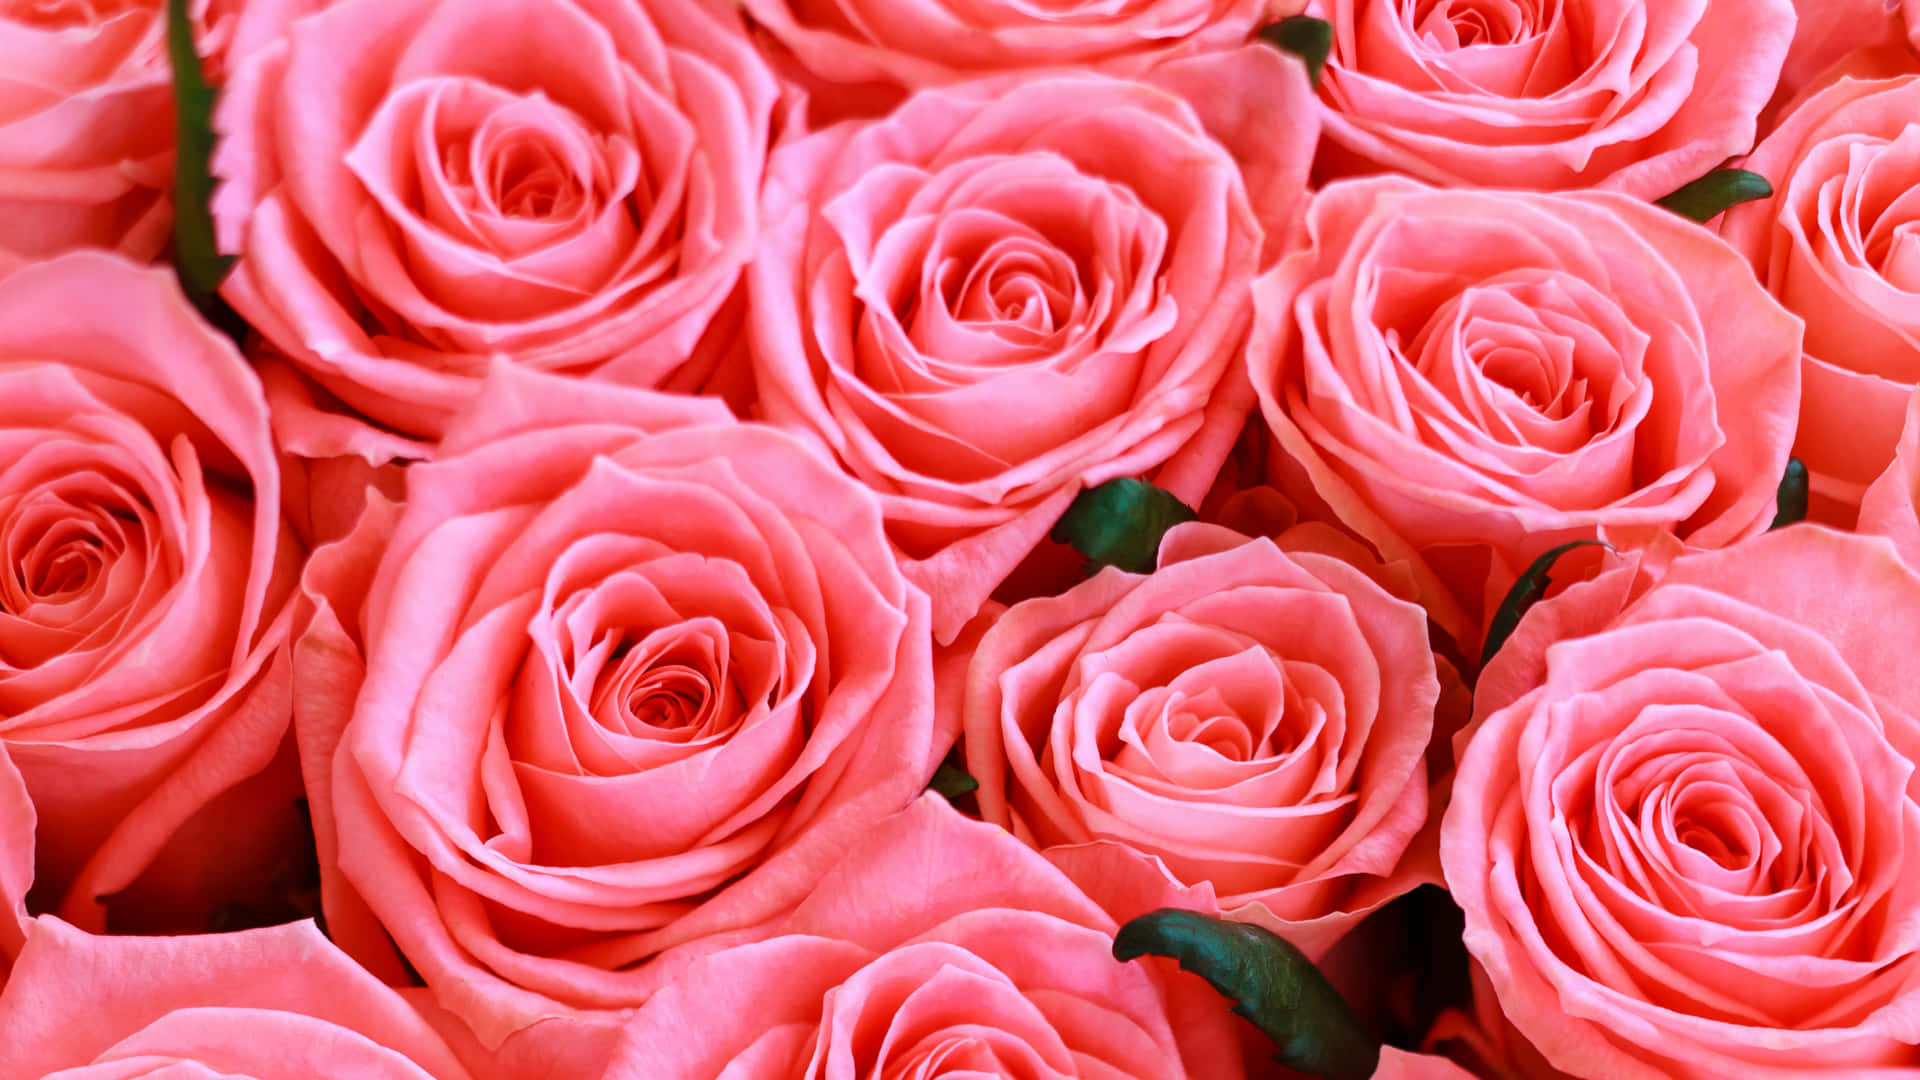 1440p Close Up Coral Roses Background